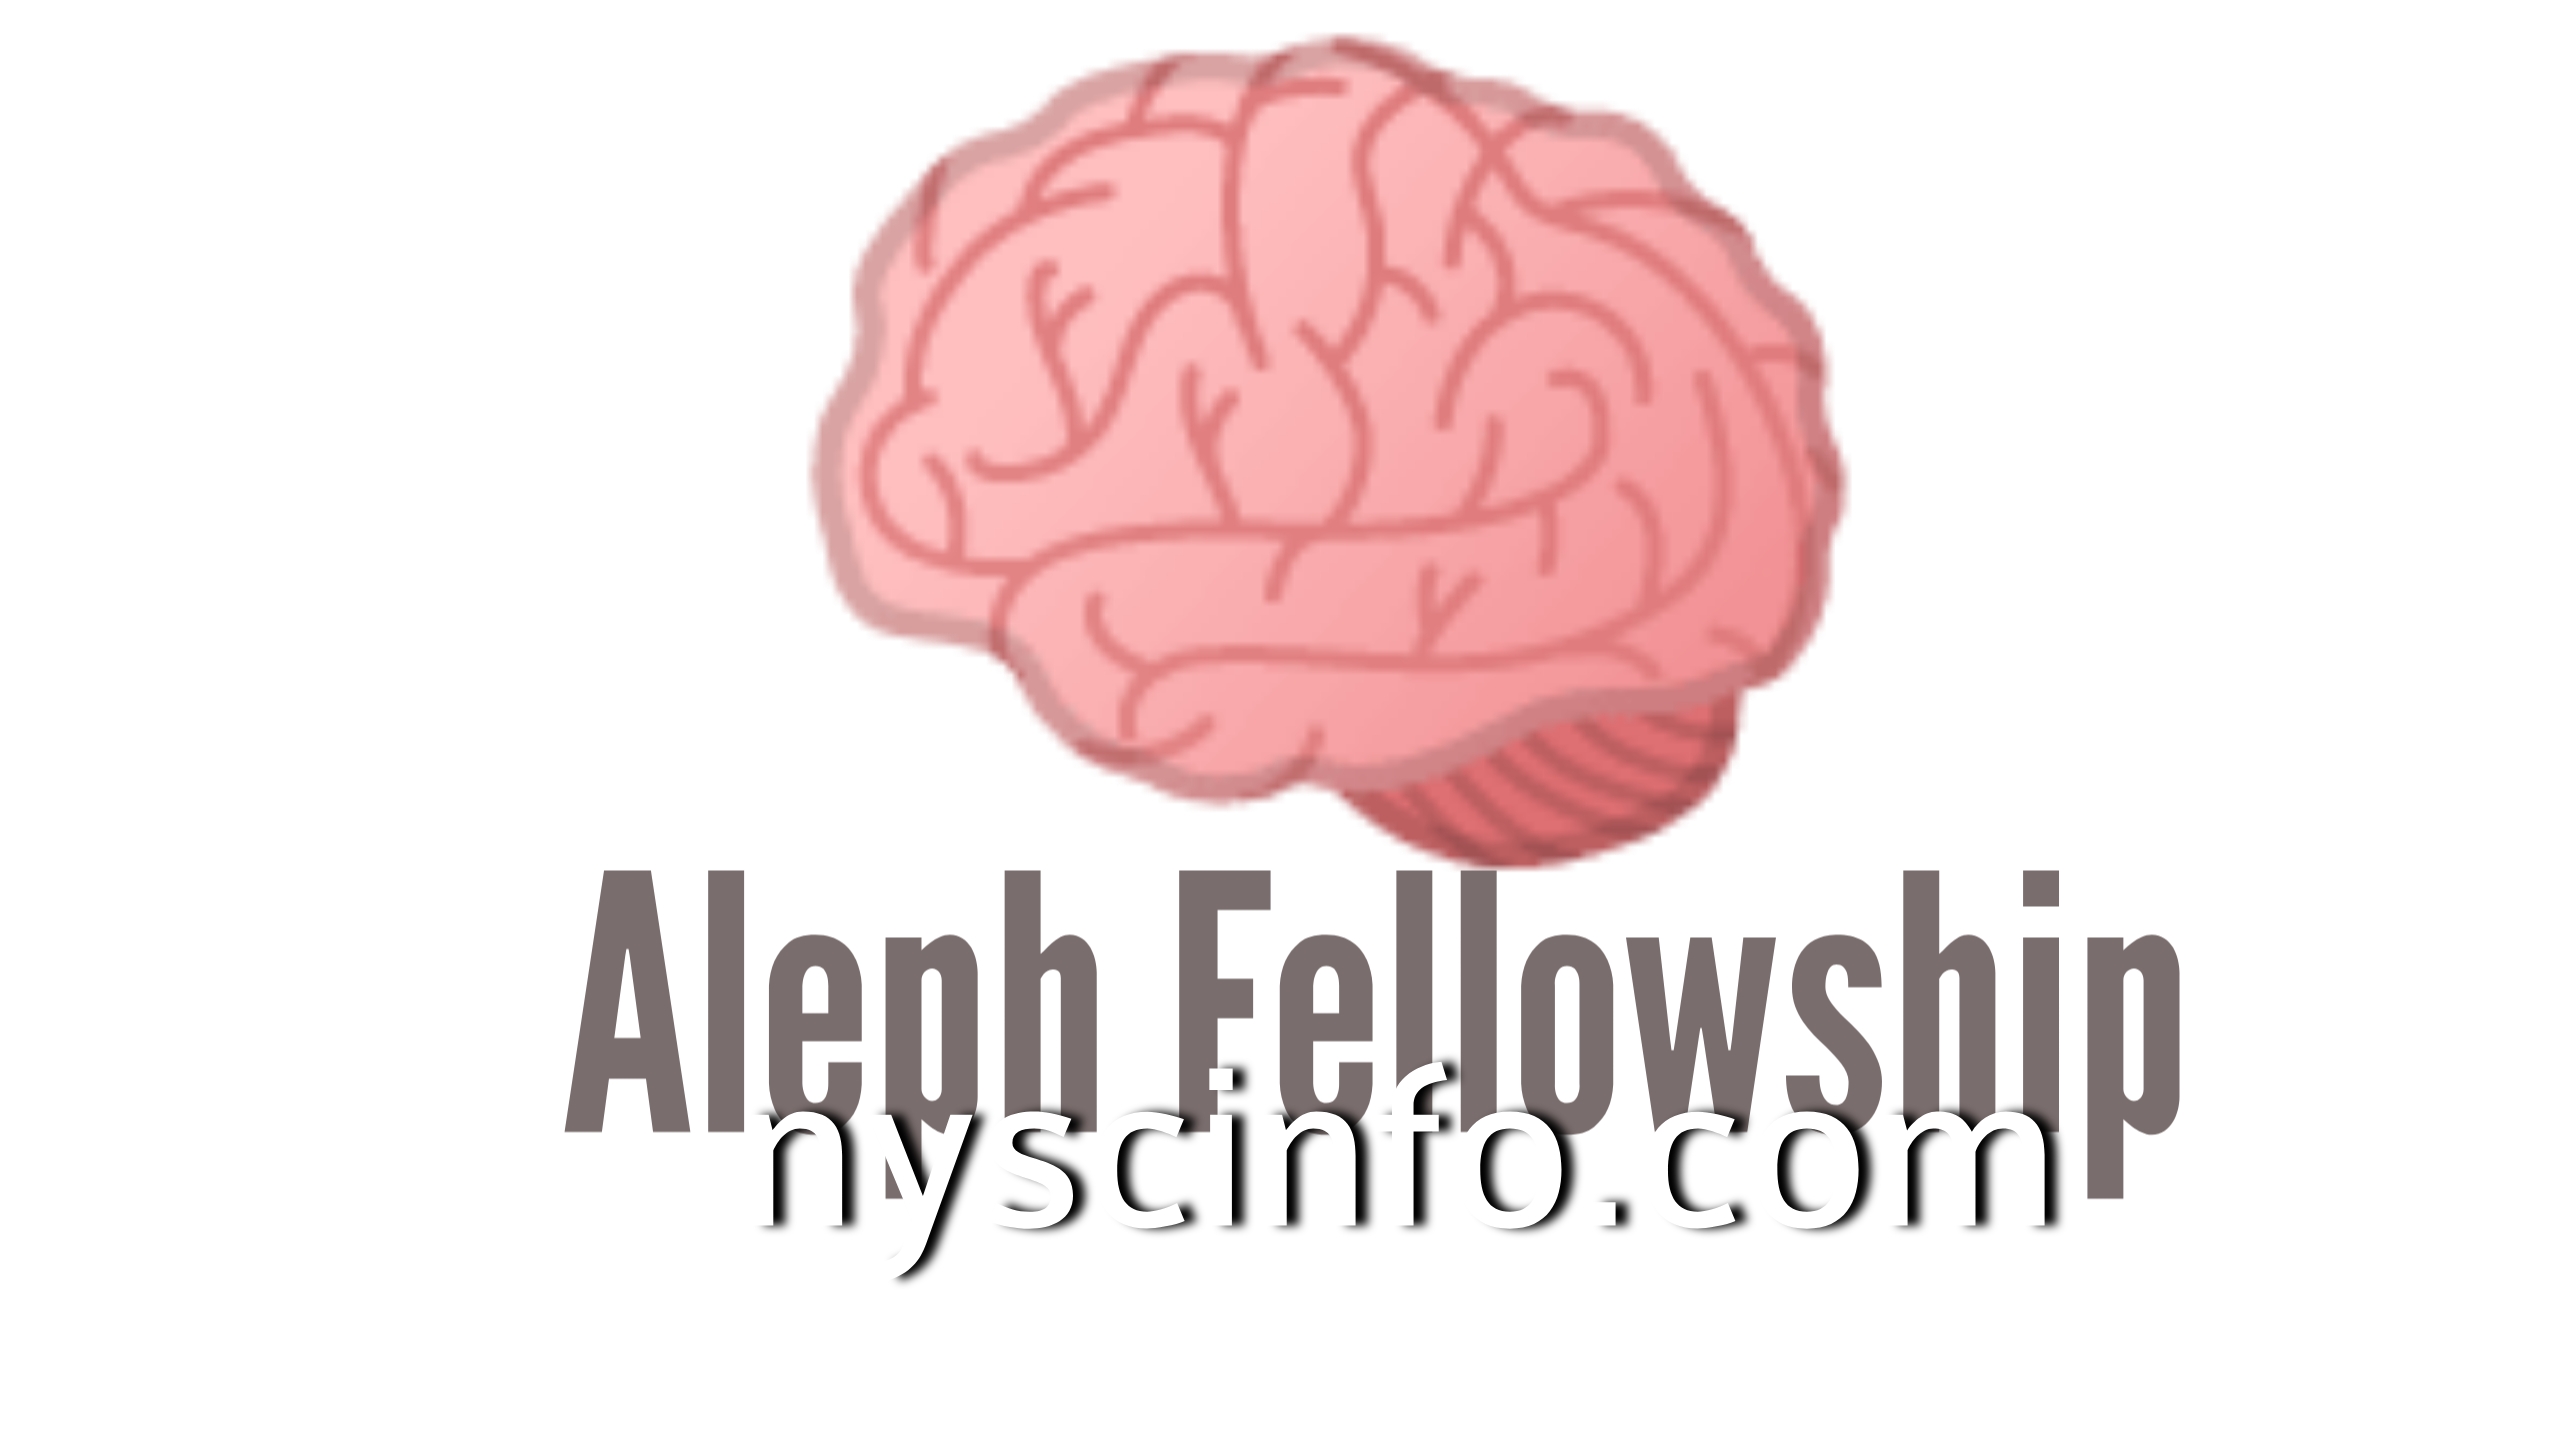 How to Apply for Aleph Fellowship for Young Nigerians 2021